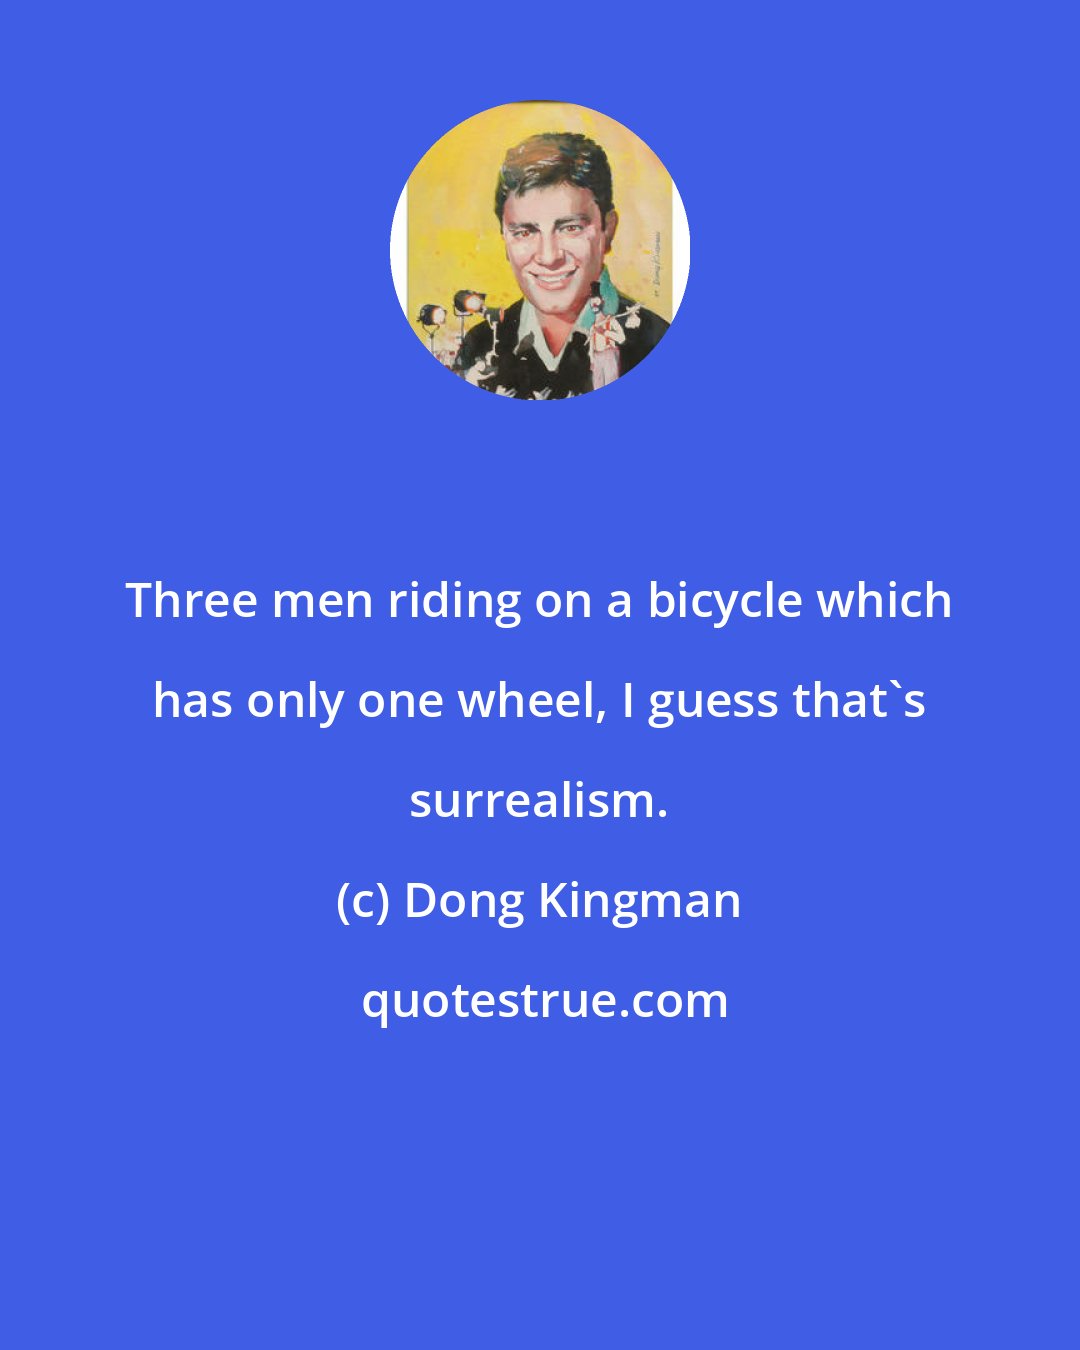 Dong Kingman: Three men riding on a bicycle which has only one wheel, I guess that's surrealism.